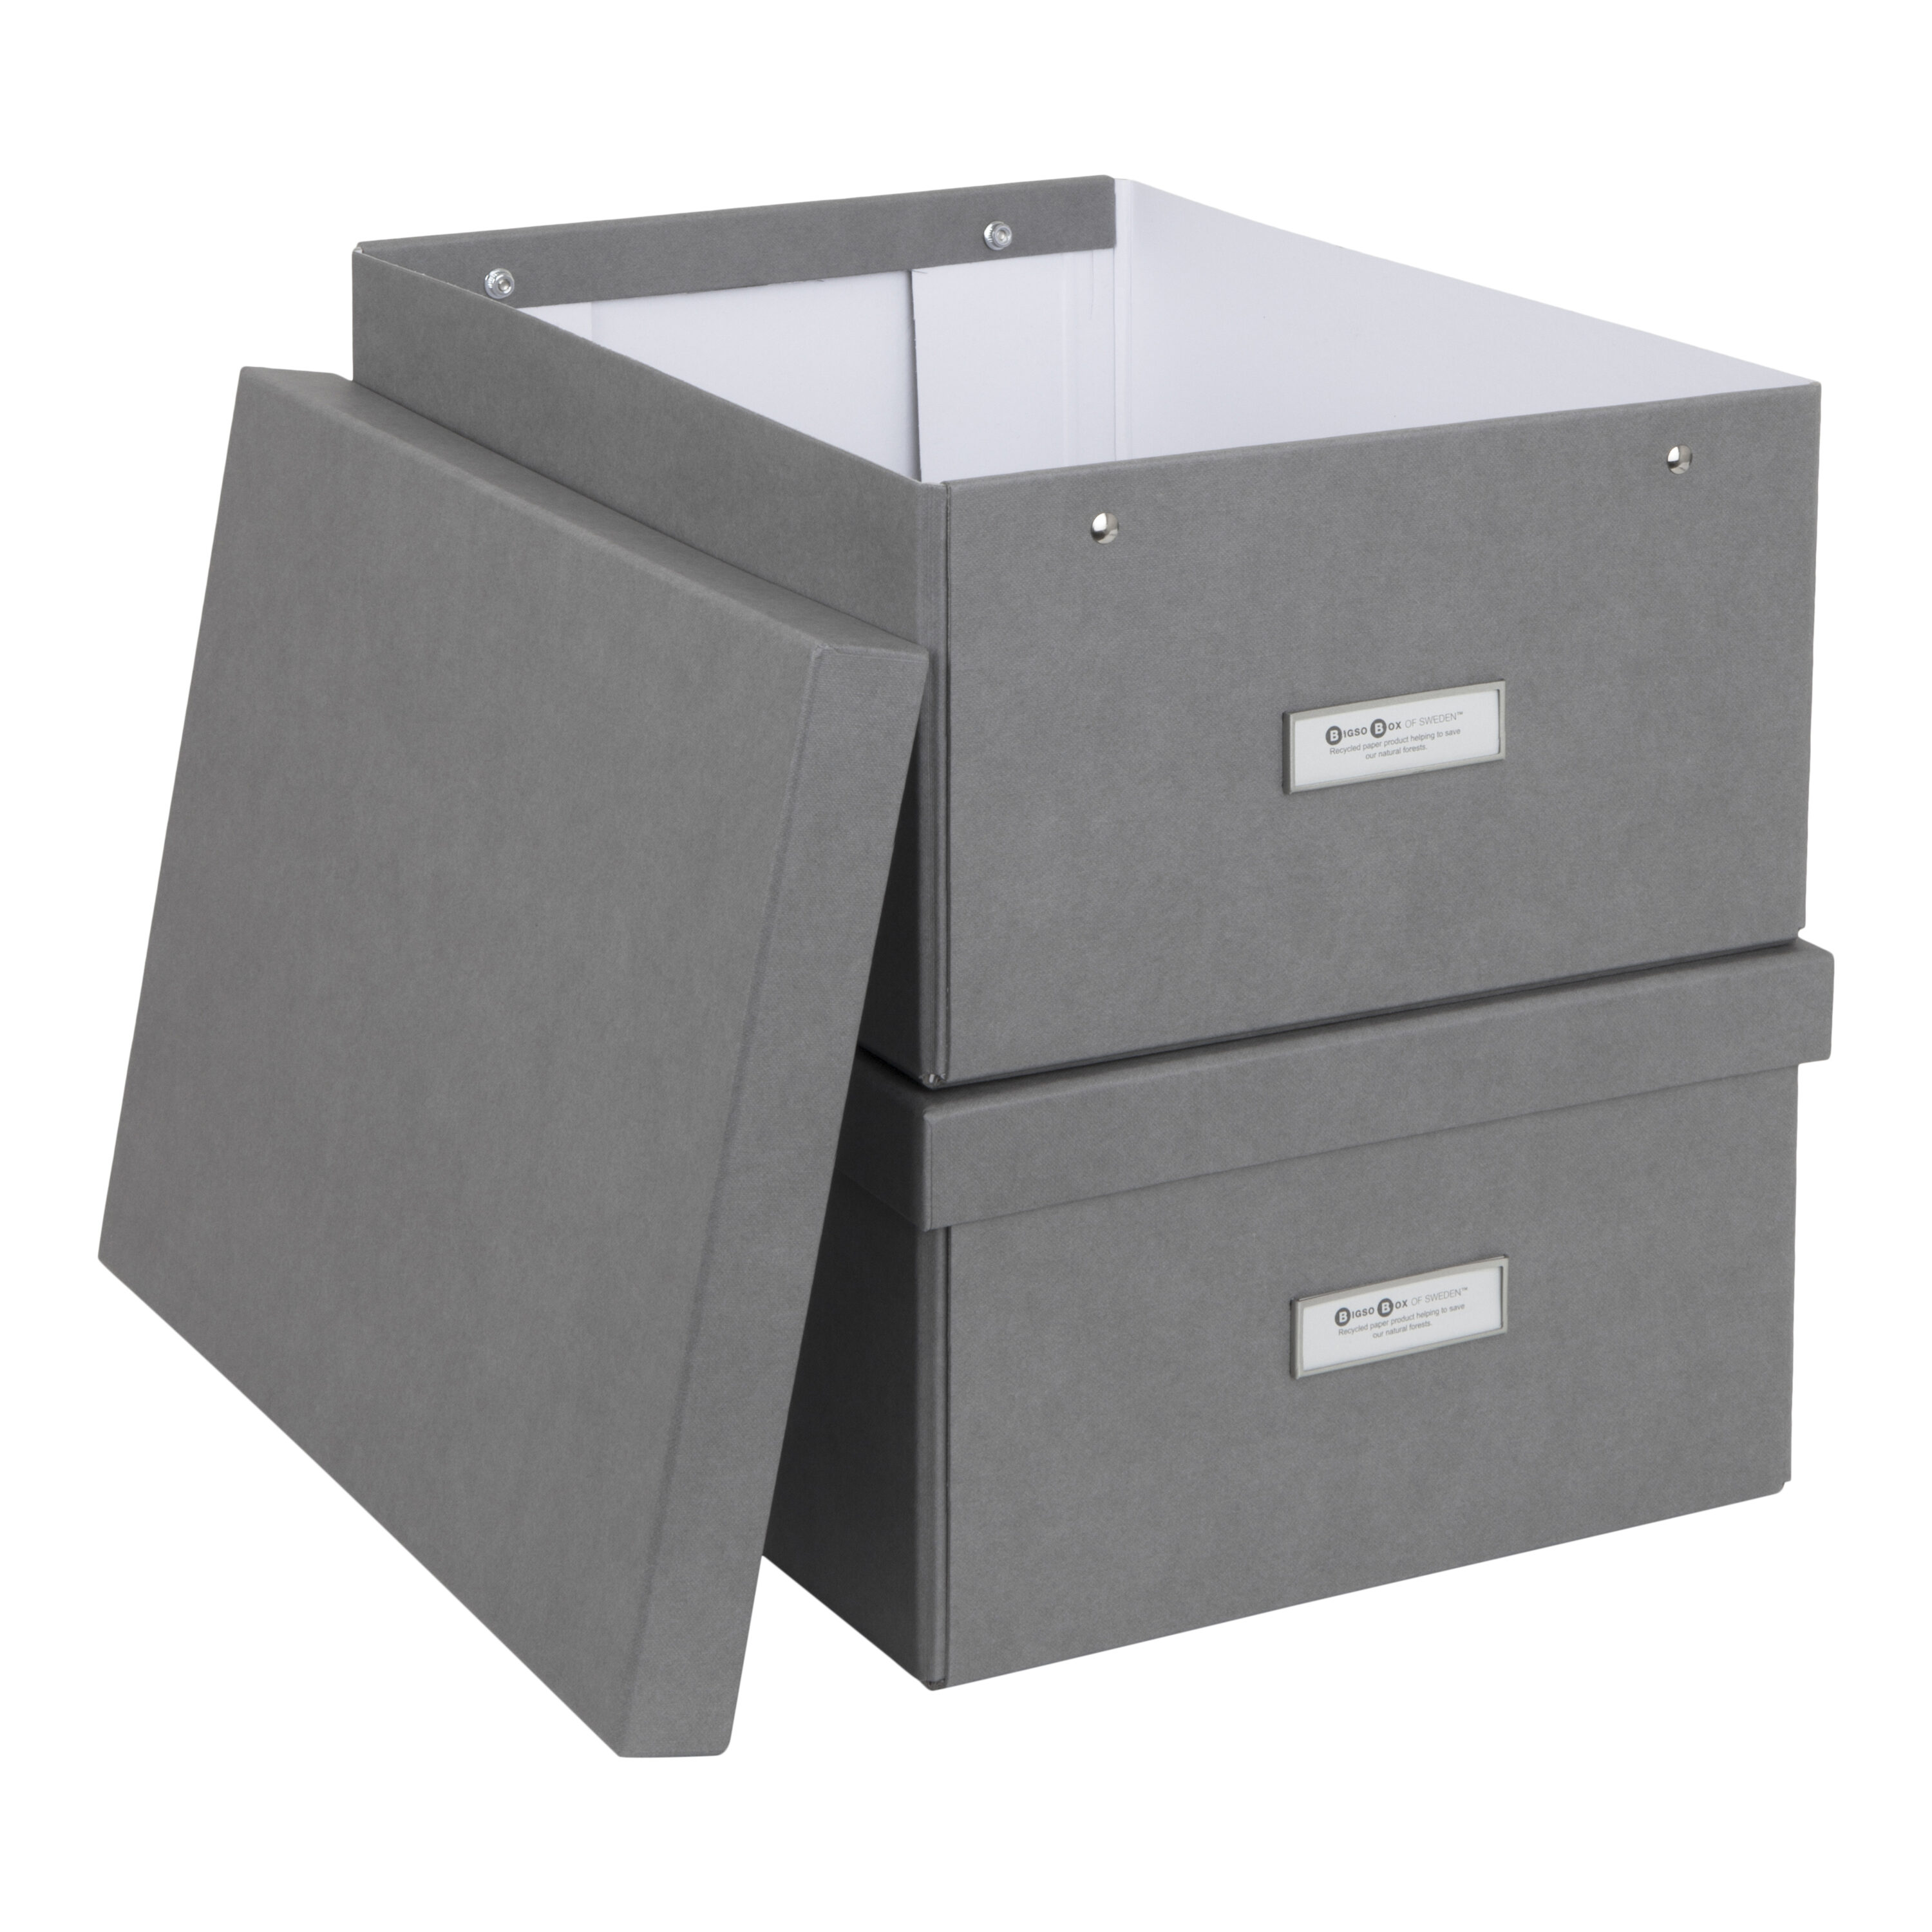 We Think Storage. Fabric Storage Boxes with Transparent Window, Storage Boxes for Closet and Shelf, 3-Pack, Gray, 12.4 x 11.6 x 8.1